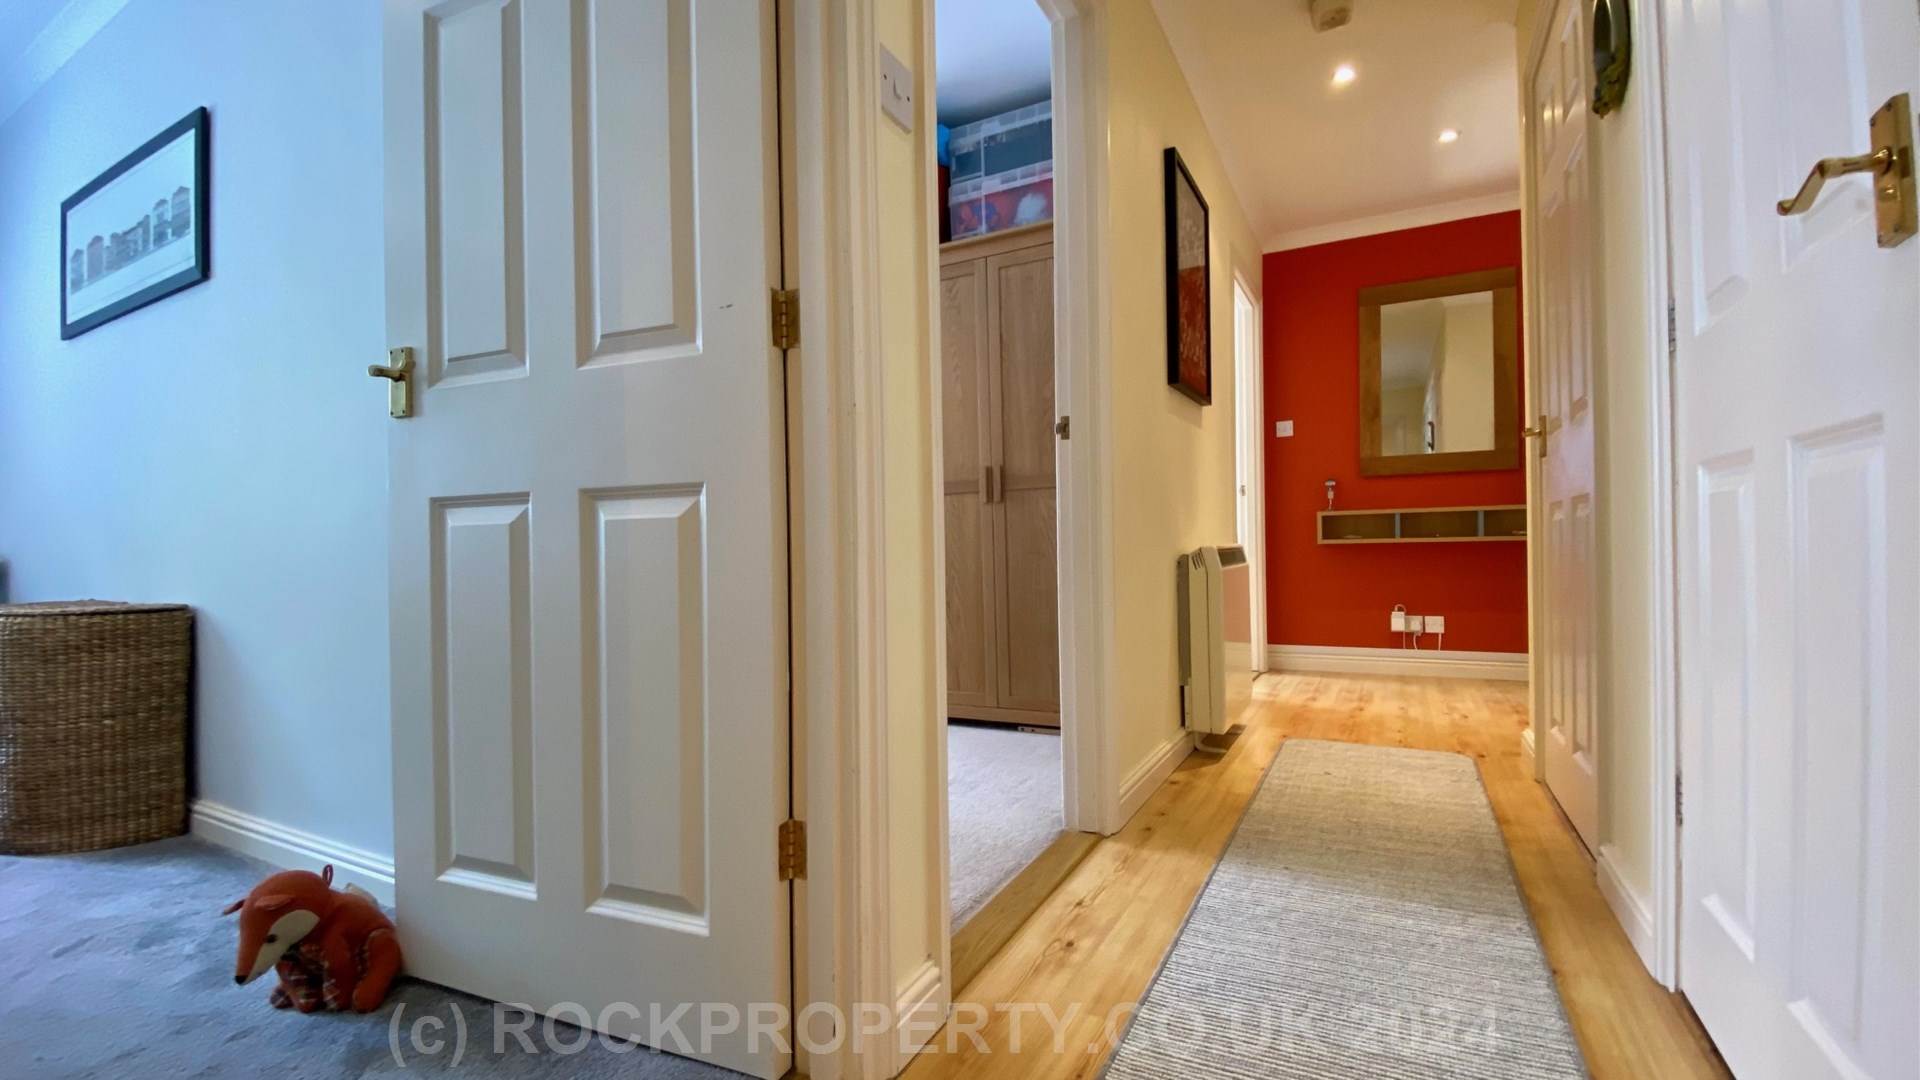 SPACIOUS 2 BED + BALCONY, Woodville Apartments, St Saviour's Road, Image 11